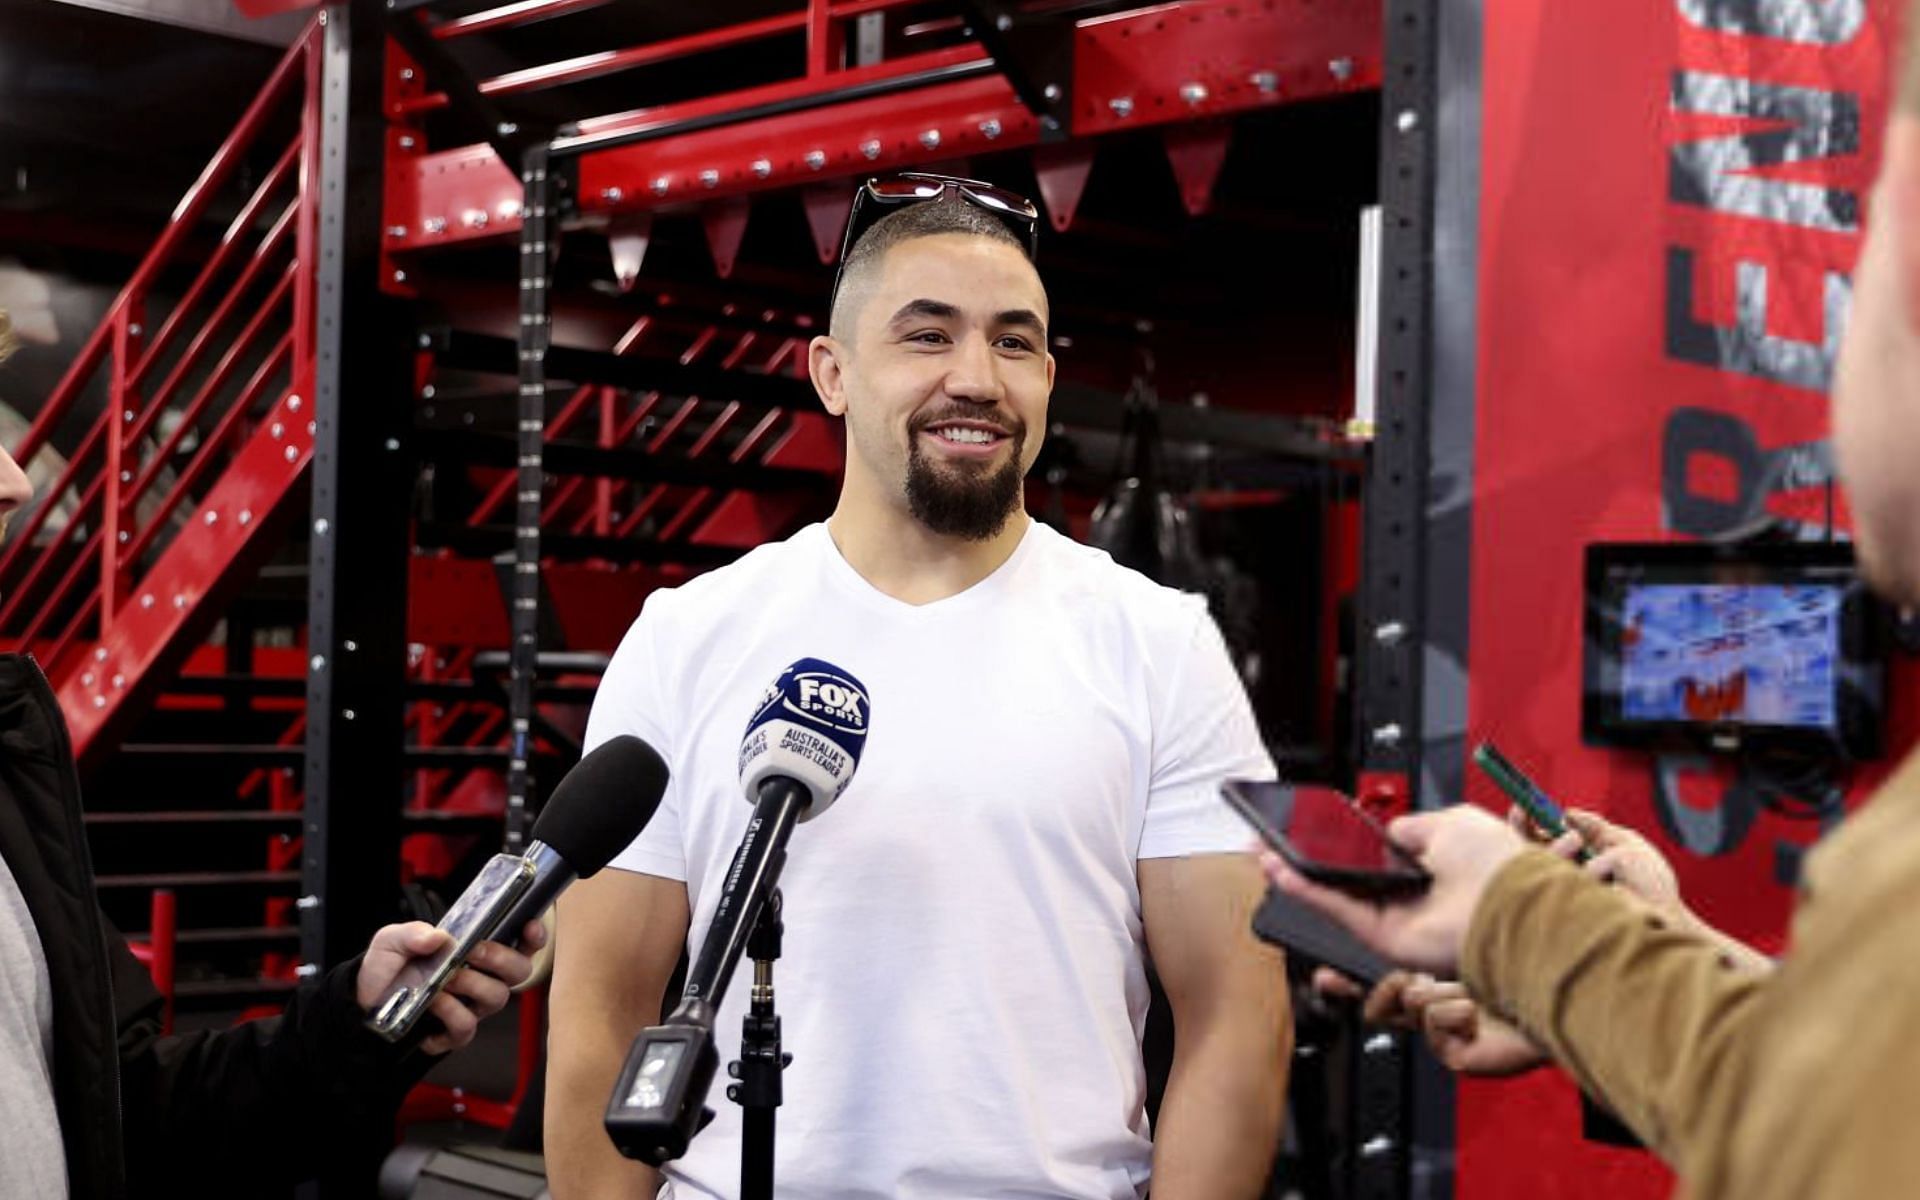 Robert Whittaker names his favorite active UFC fighter right now